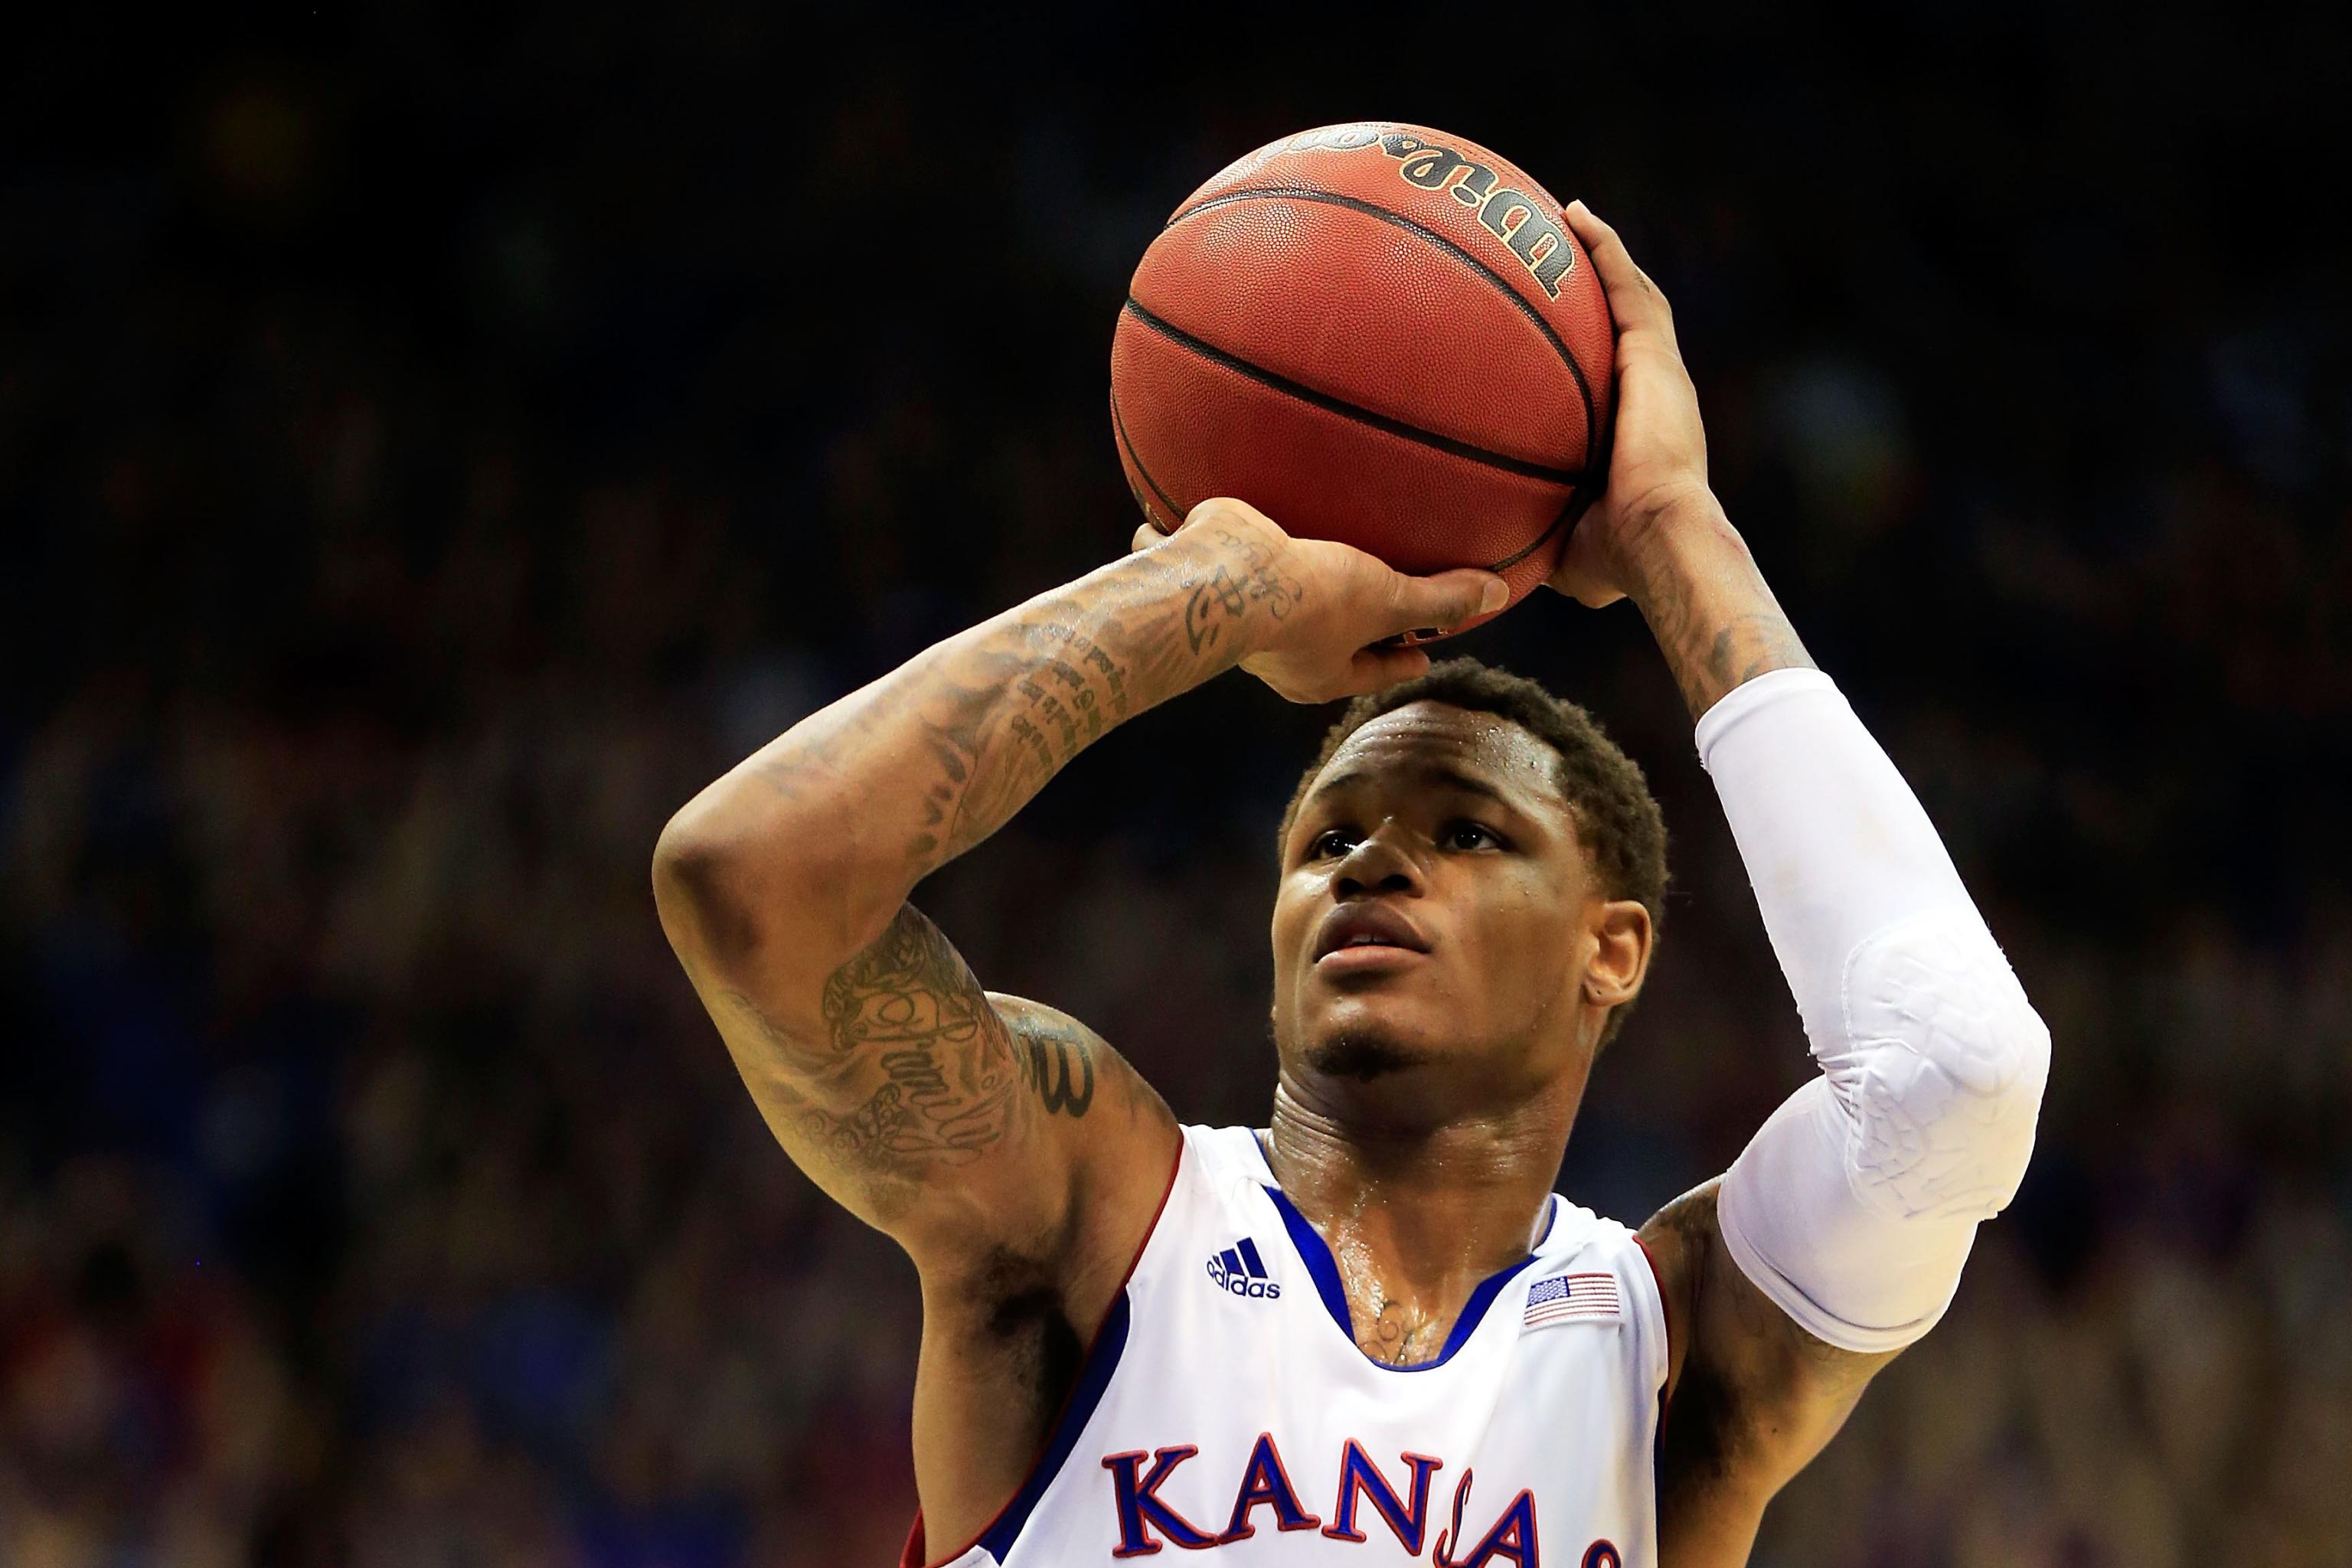 KU freshman Ben McLemore declares for NBA Draft  News, Sports, Jobs -  Lawrence Journal-World: news, information, headlines and events in  Lawrence, Kansas